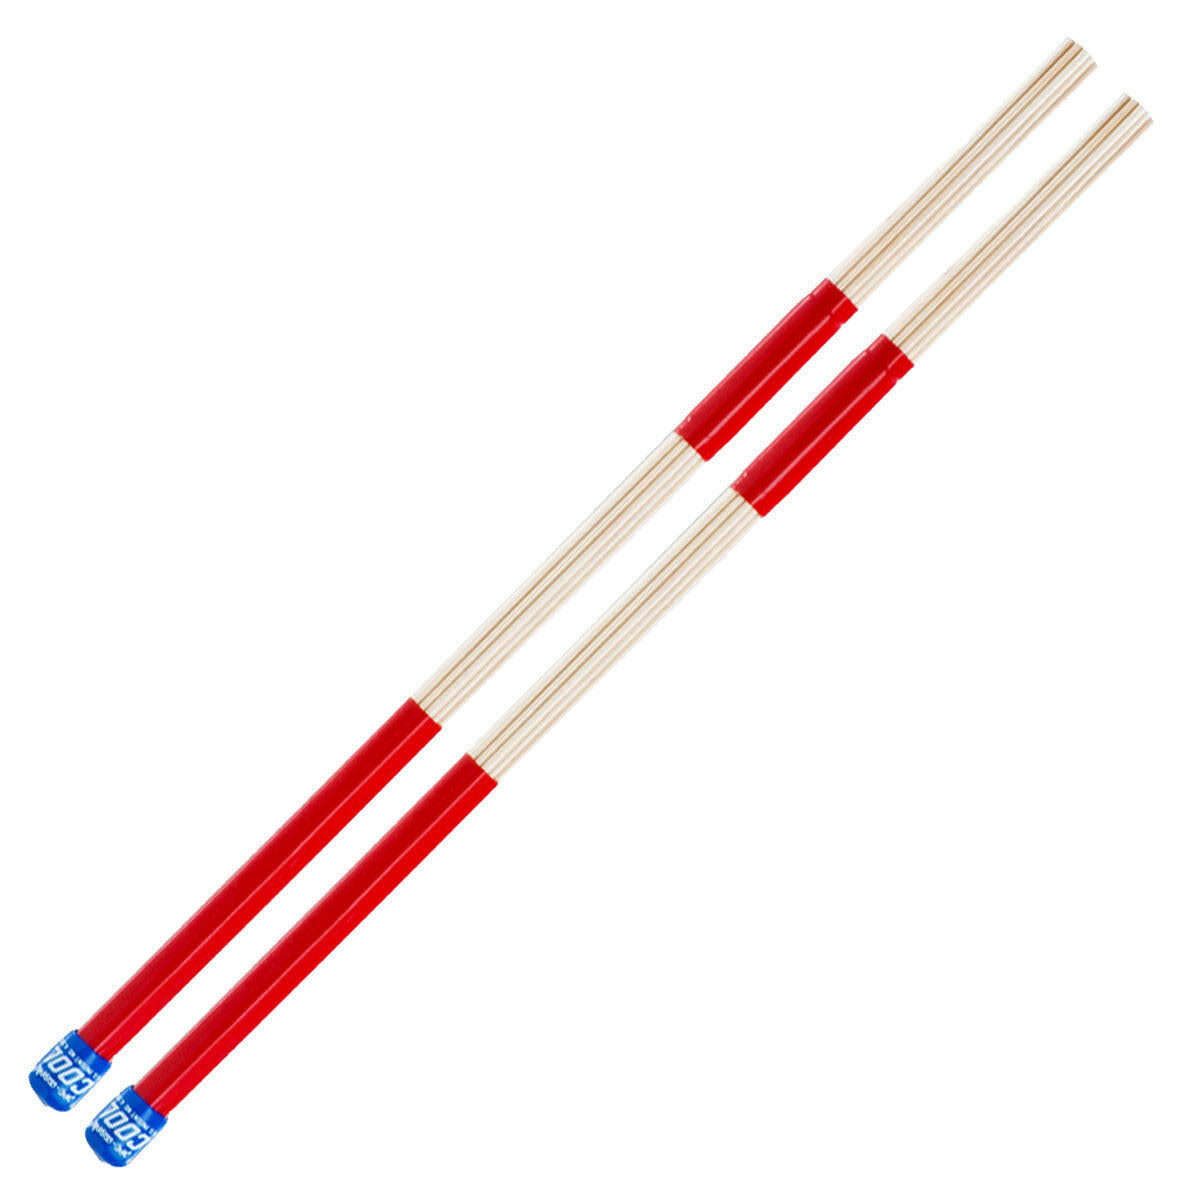 Pro-Mark Cool Rod Specialty Drumsticks